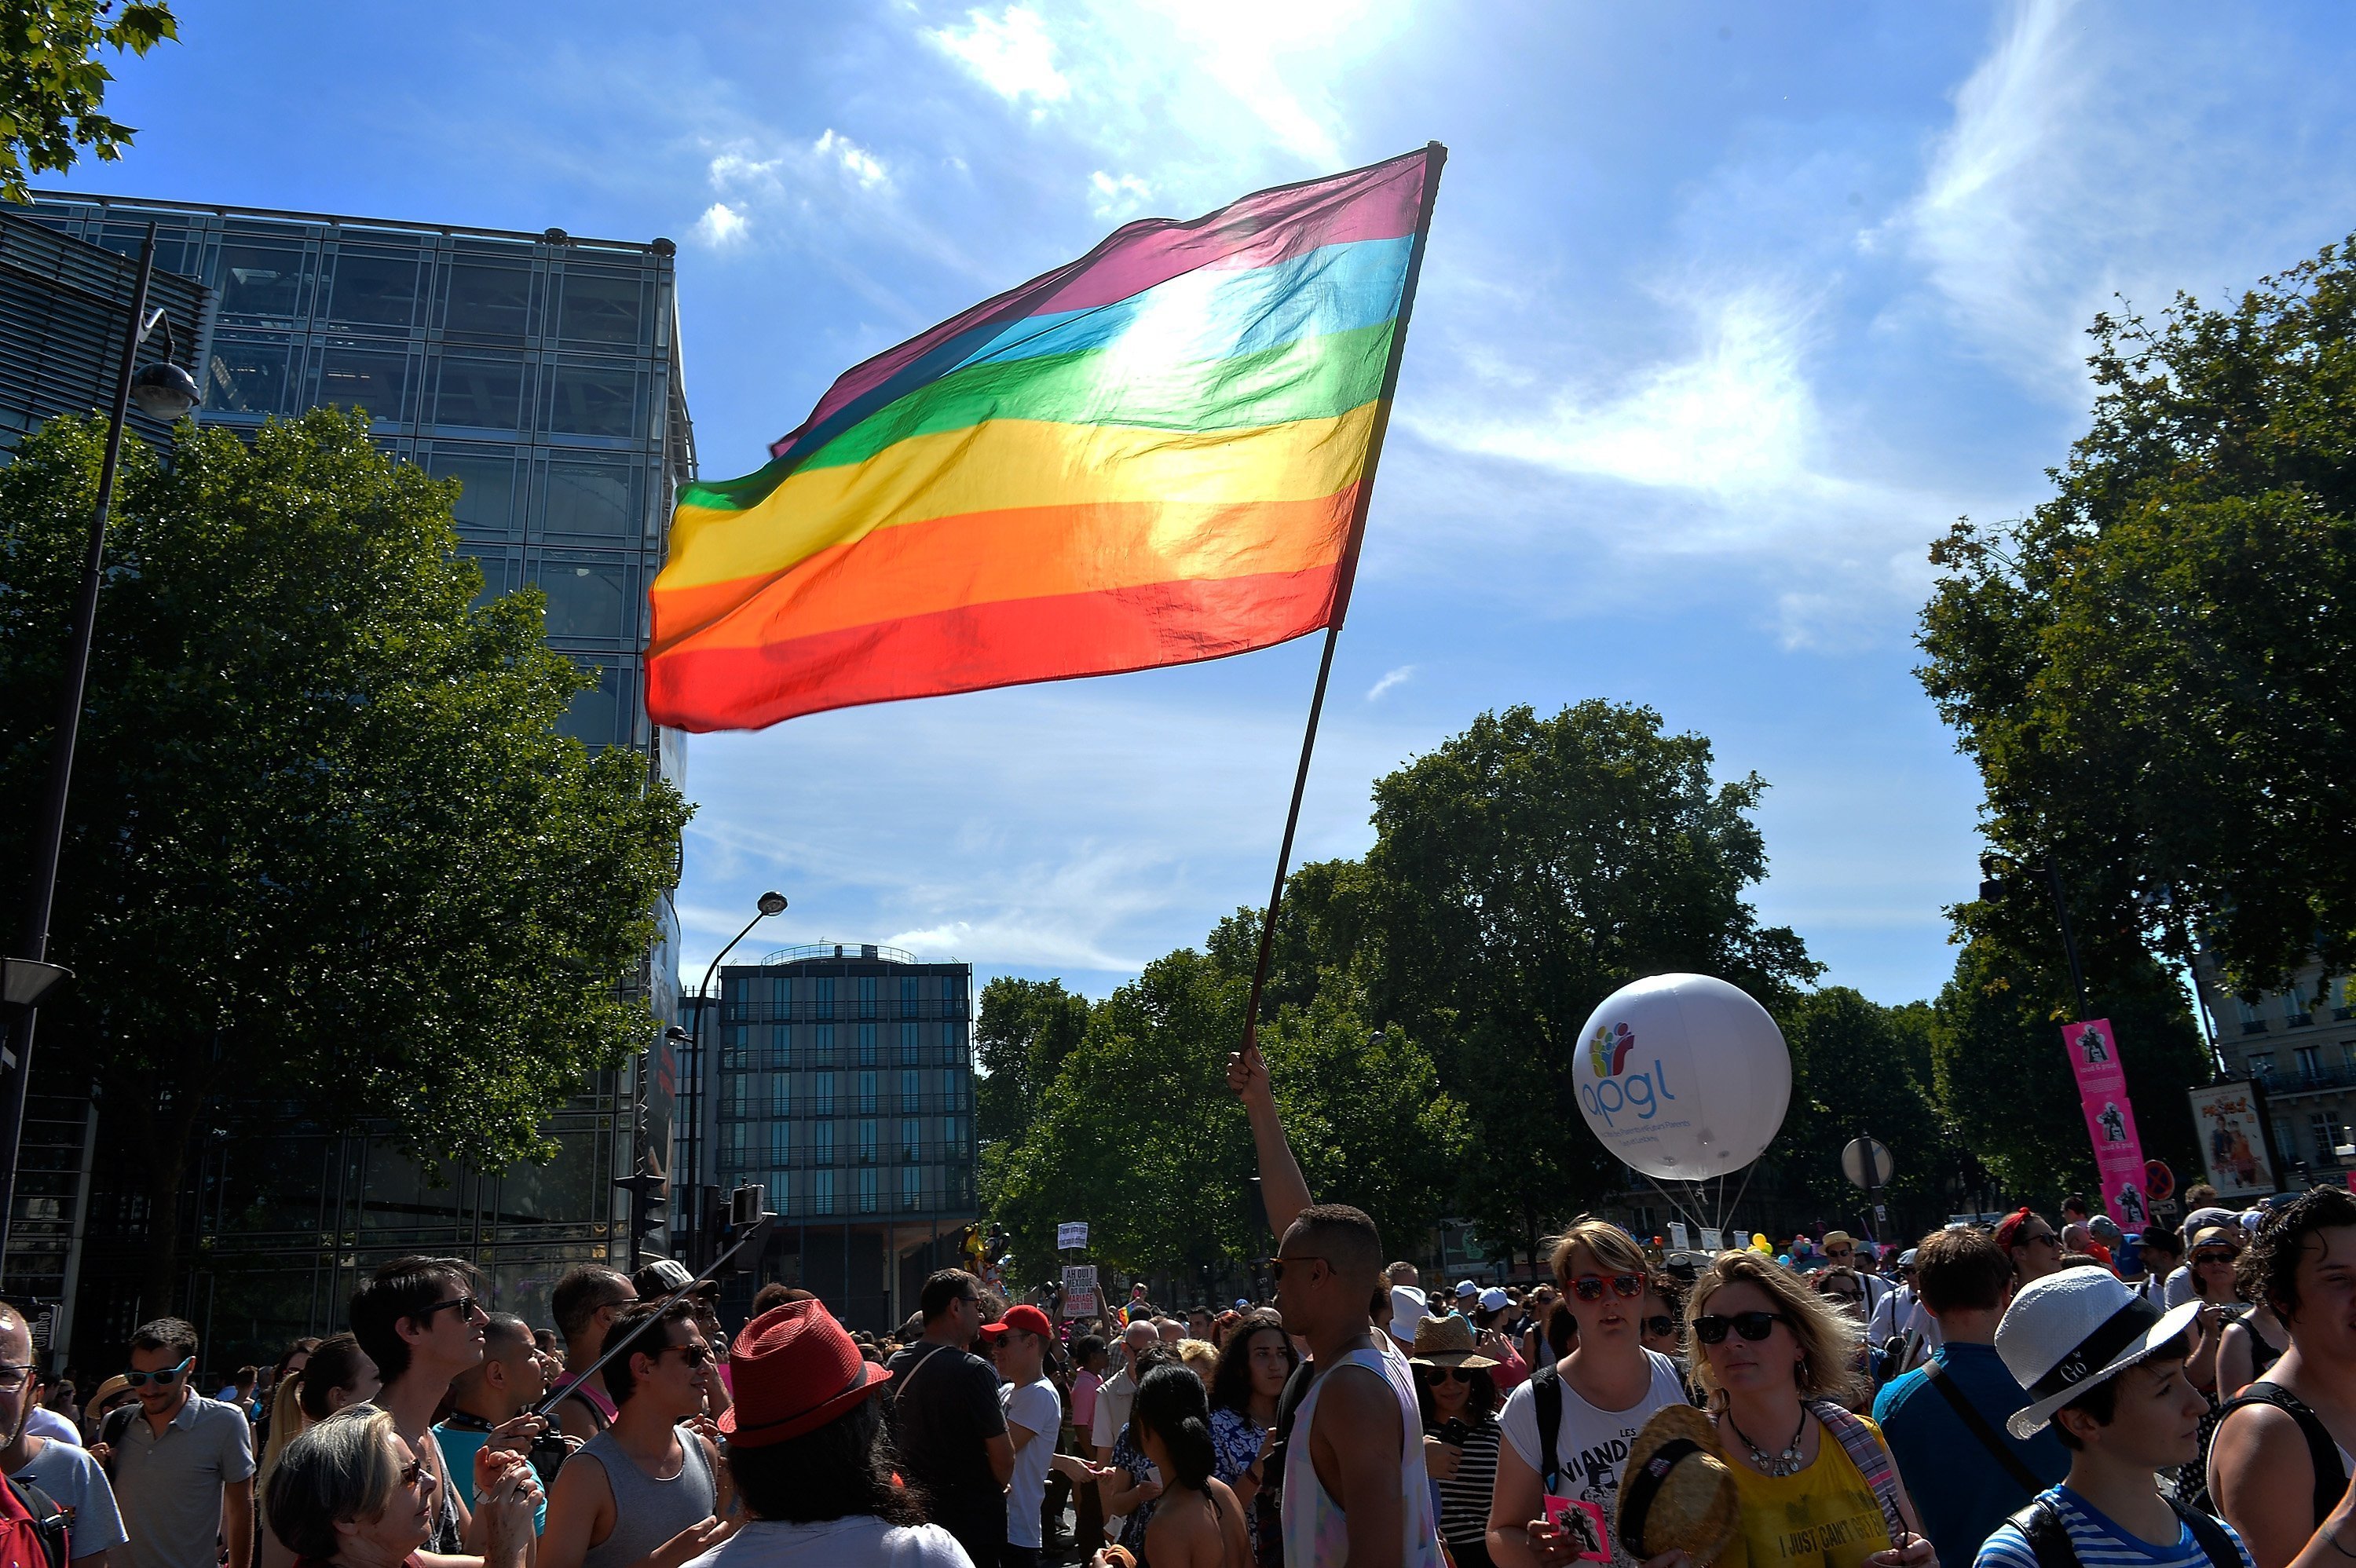 A rainbow flag being waved at the Gay Pride Parade in Paris | Photo: Getty Images